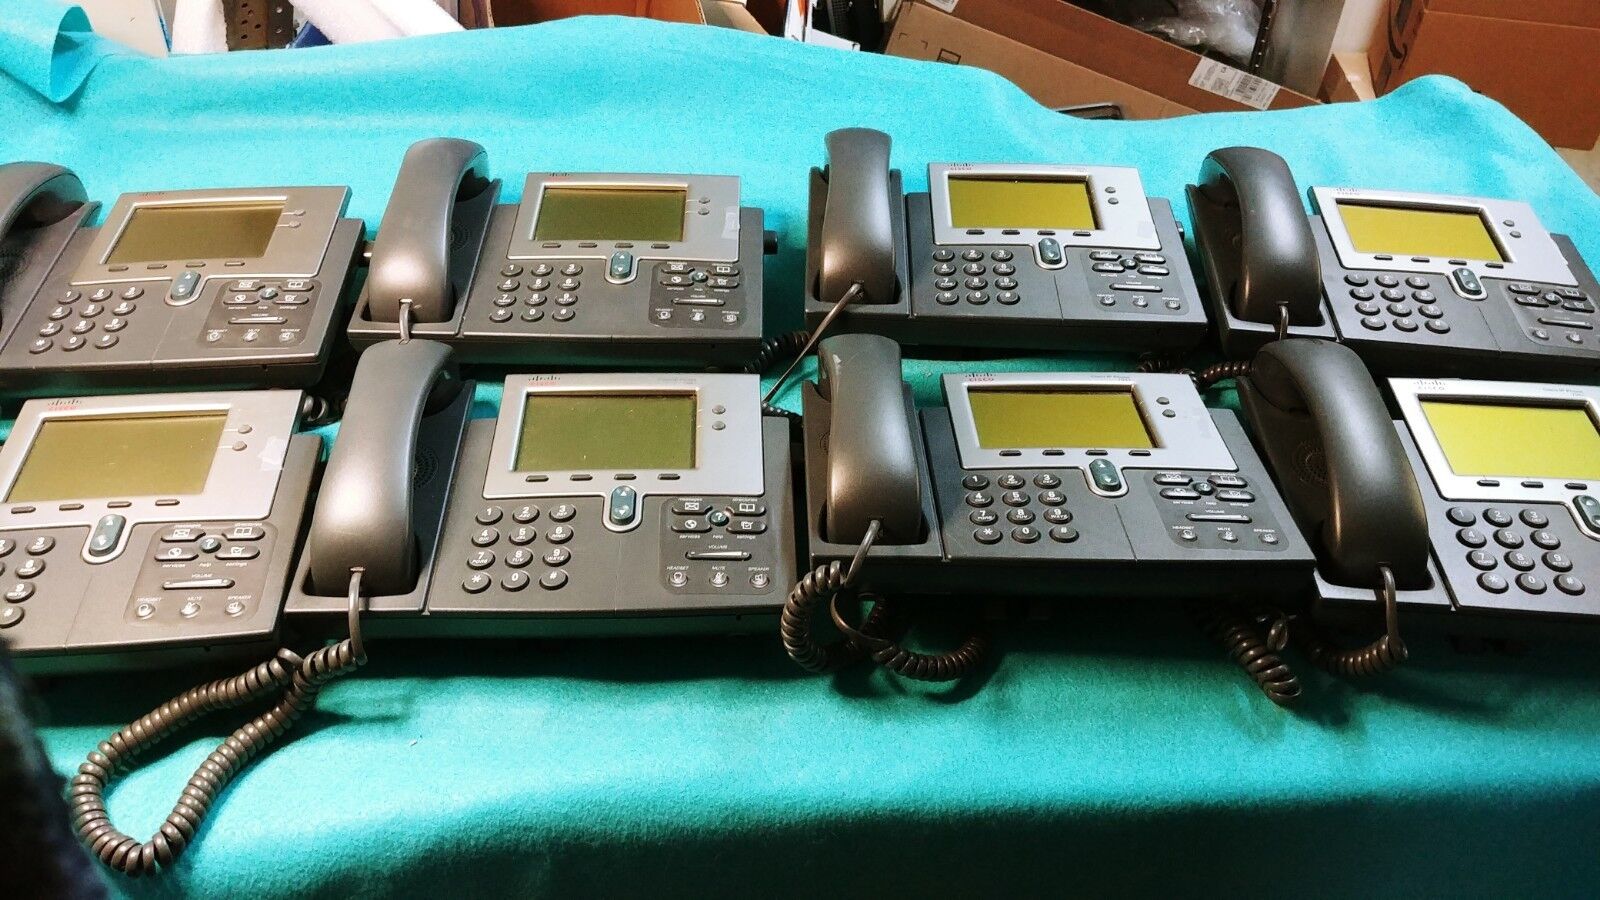 Lot of 39 Cisco 7941 CP-7941G IP Phones and Handsets - No other Accessories 